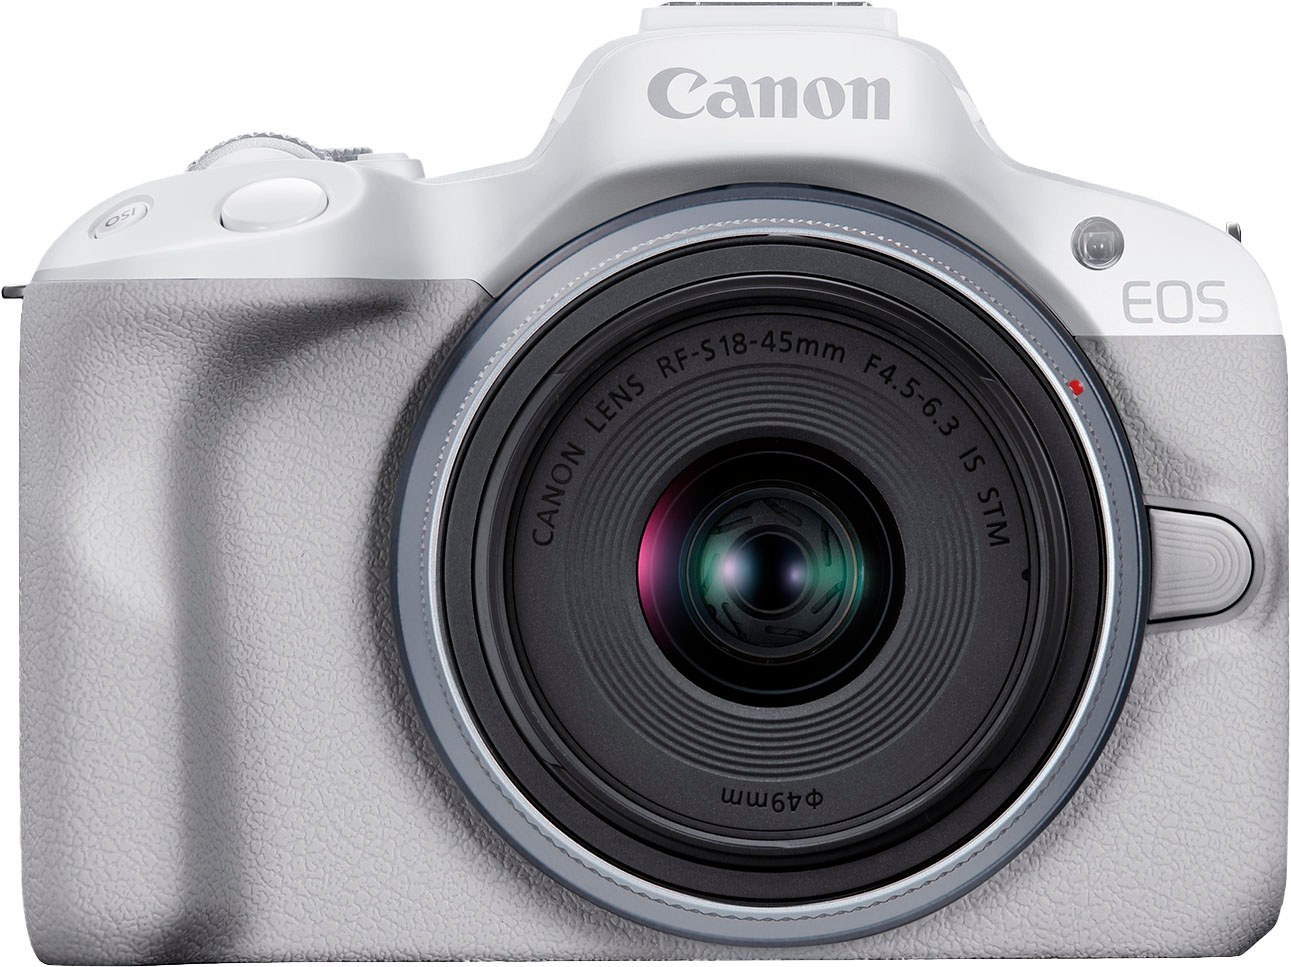 Canon EOS R50 4K Video Mirrorless Camera with RF-S 18-45mm f/4.5-6.3 IS STM  Lens White 5812C012 - Best Buy